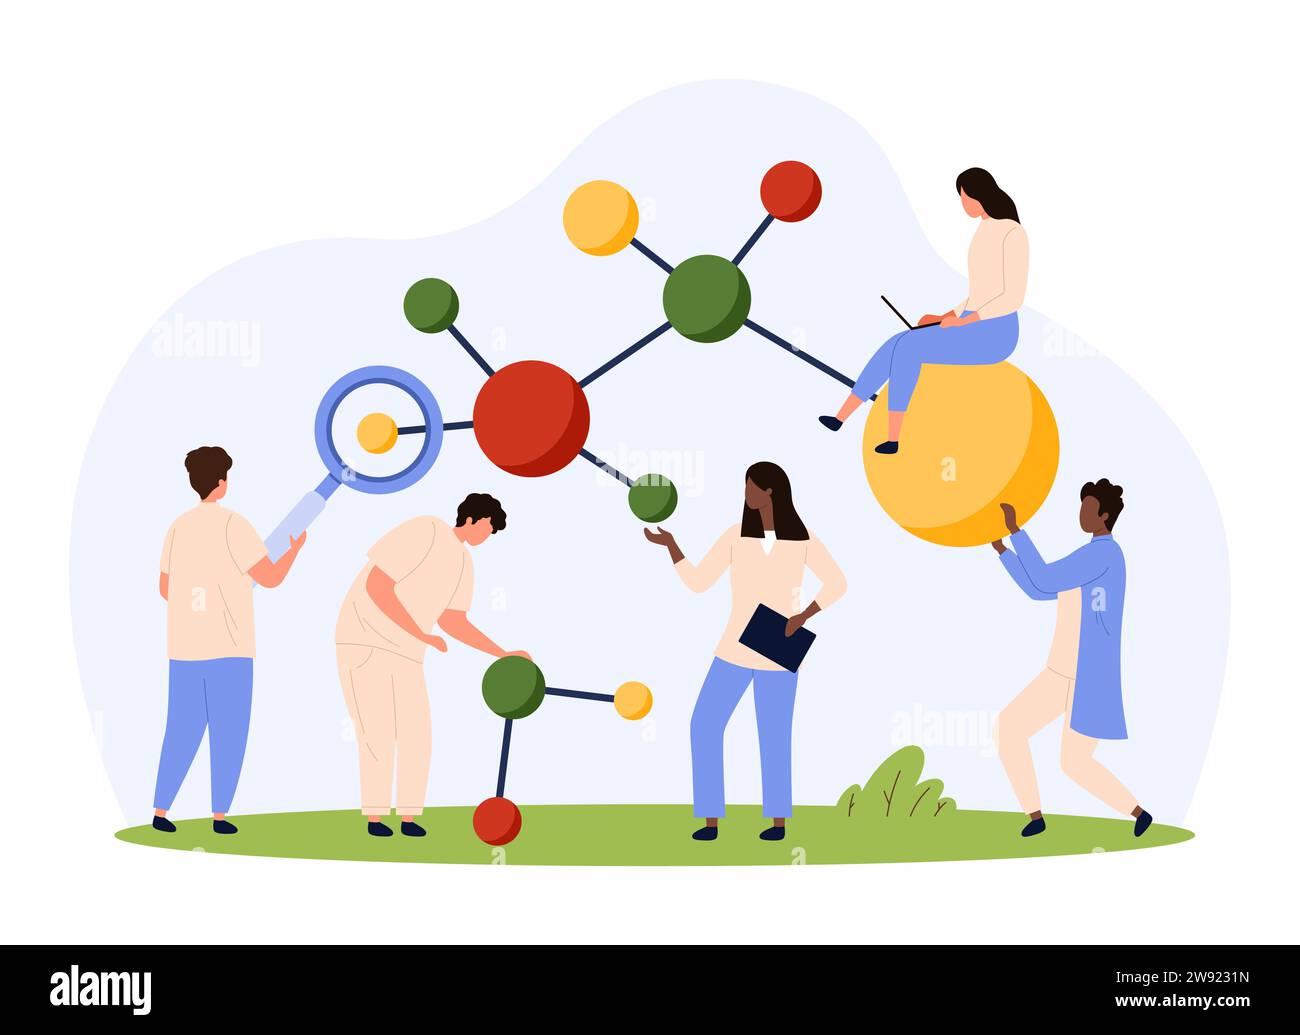 Molecular structure and genetic research vector illustration. Cartoon tiny people work on analysis of molecule digital model with atom spheres and cha Stock Vector